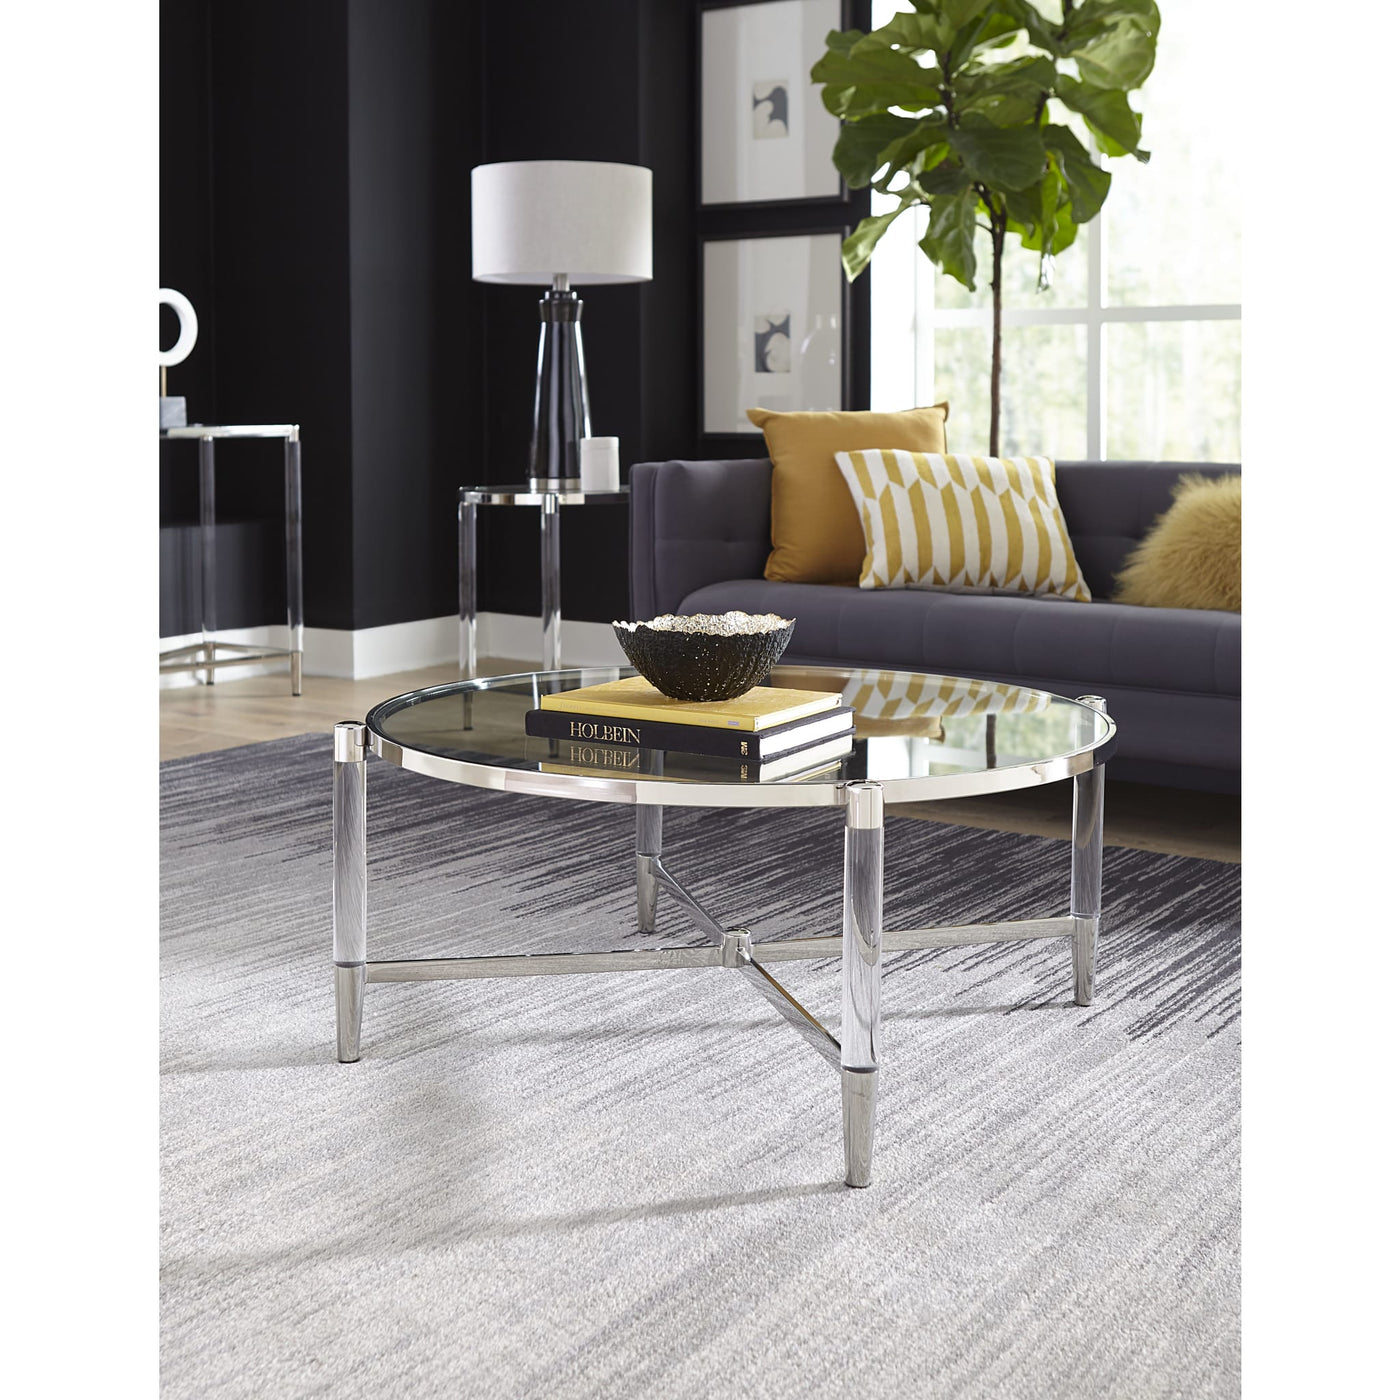 Marilyn Coffee Table- Click for Price Drop